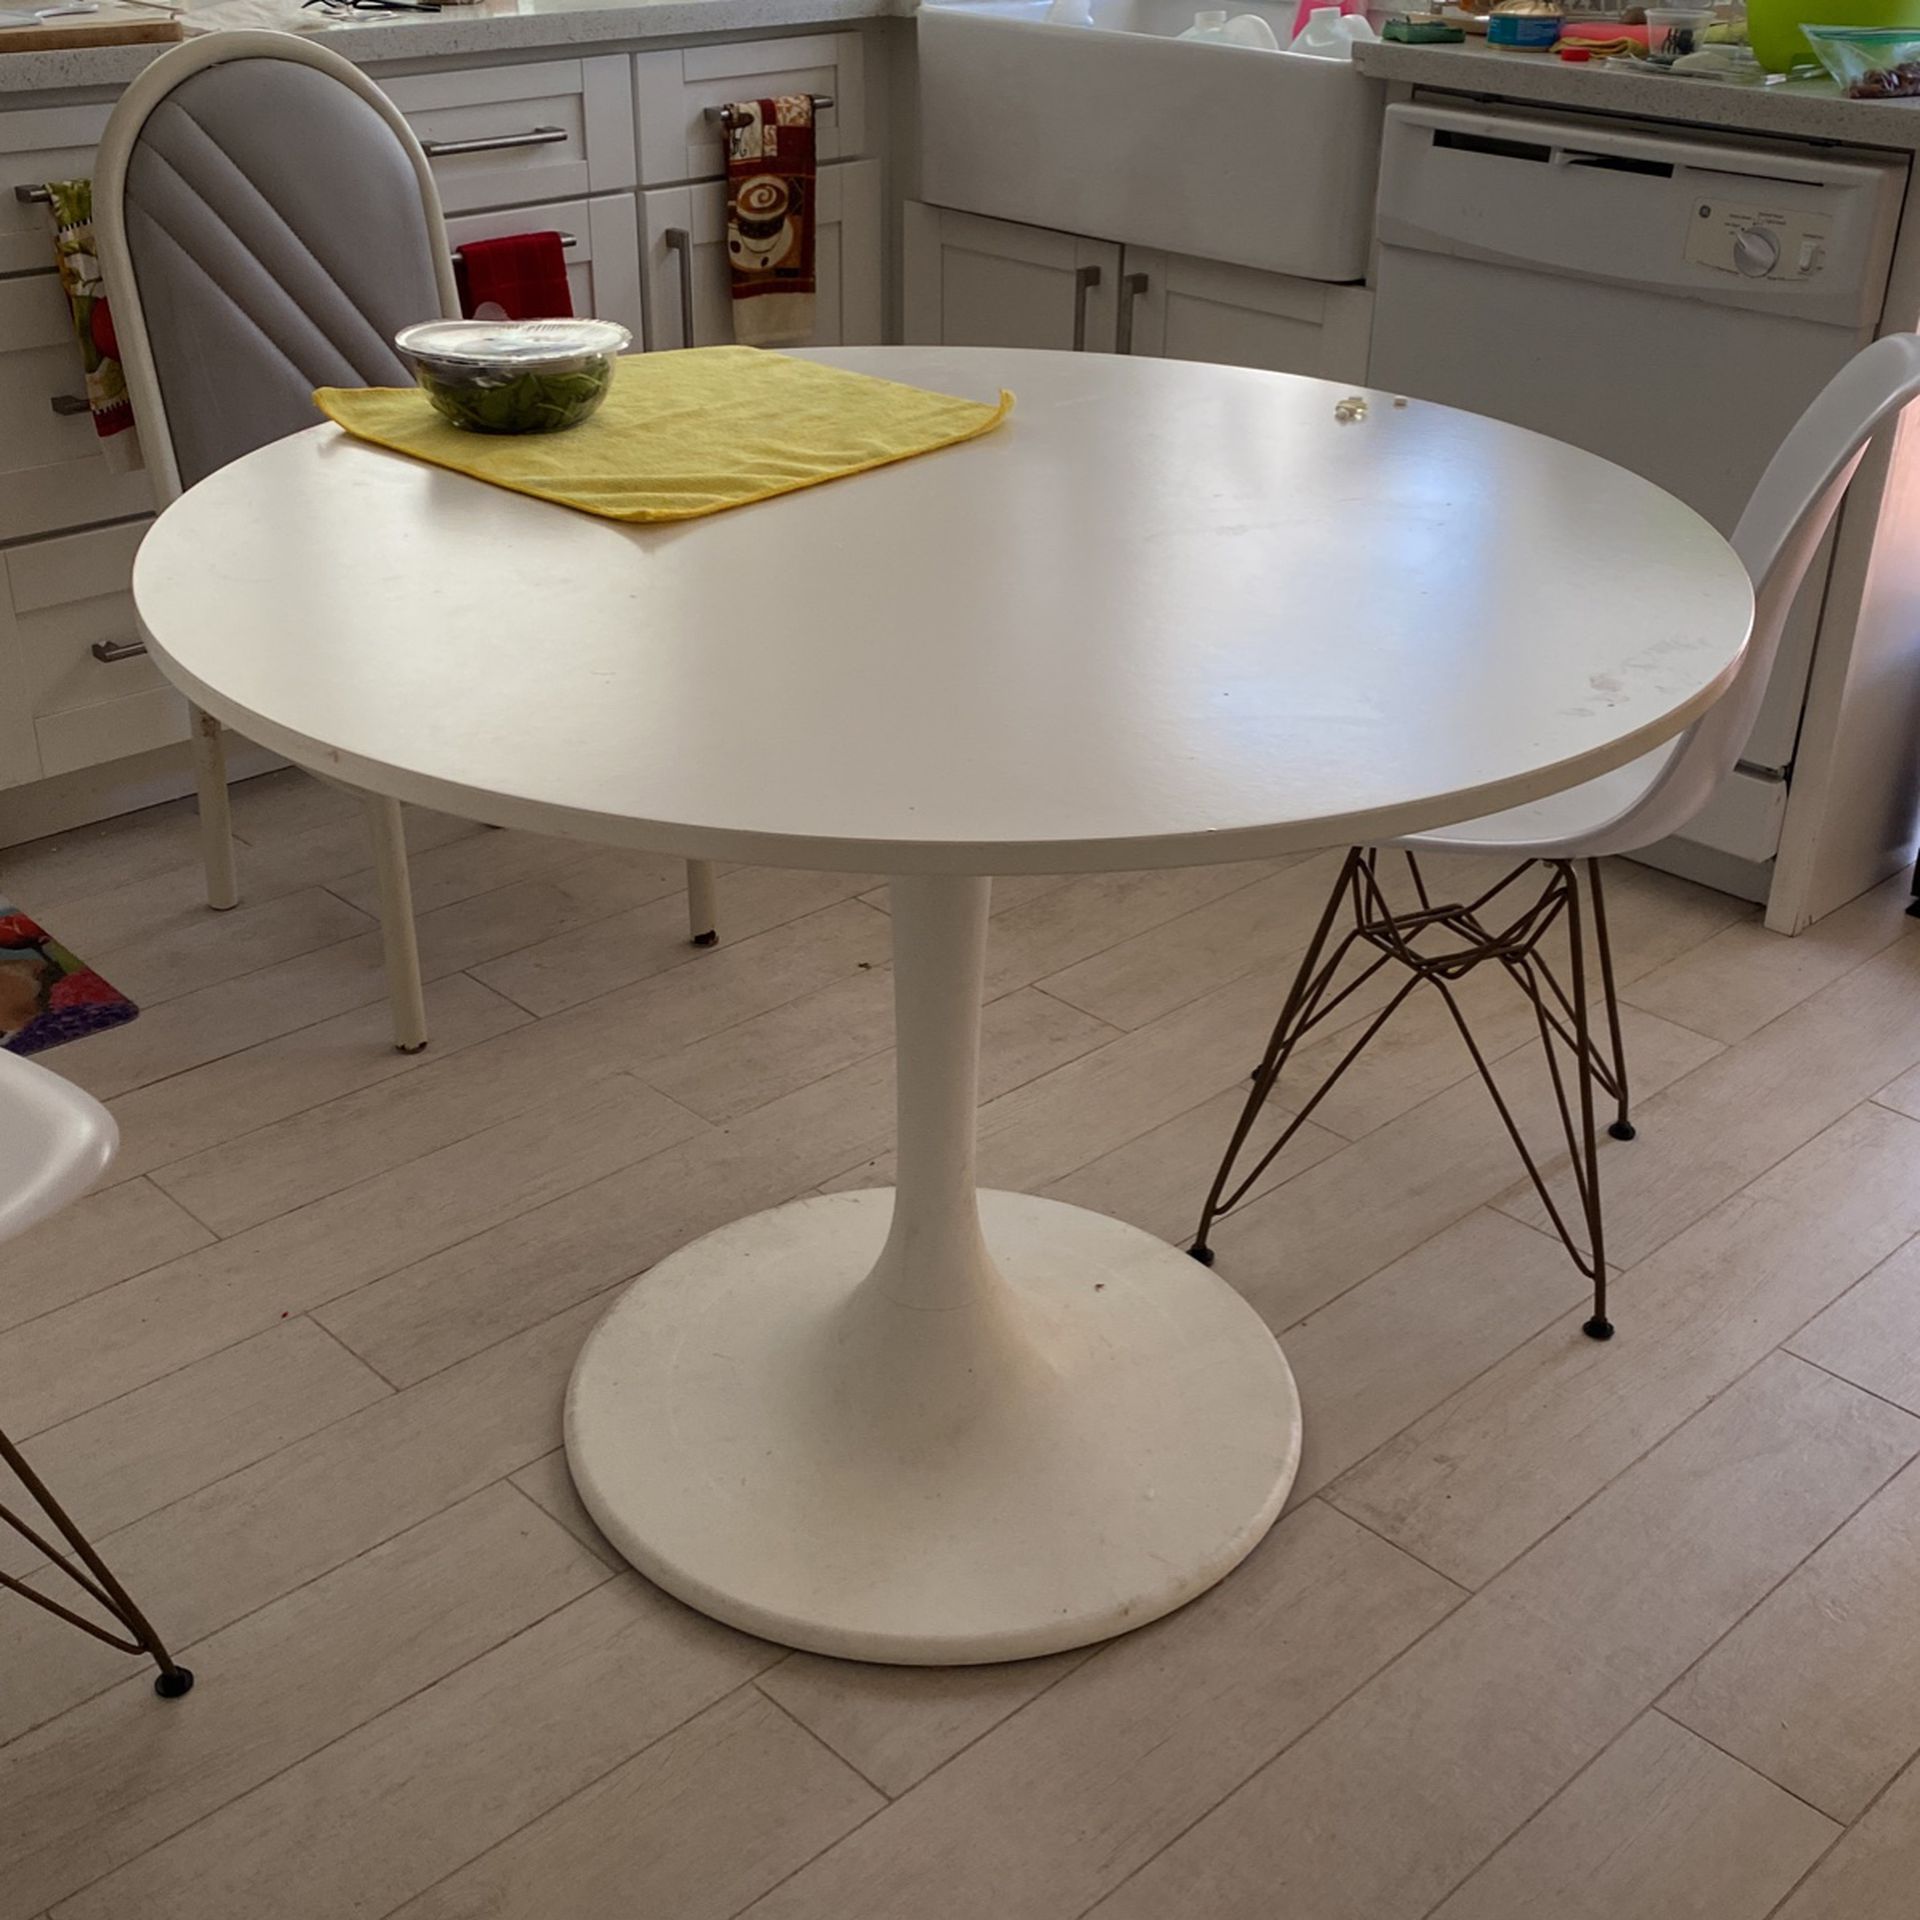 Zarinen  Like  Breakfast Or Dining Table With 2 Chairs  For  160.00